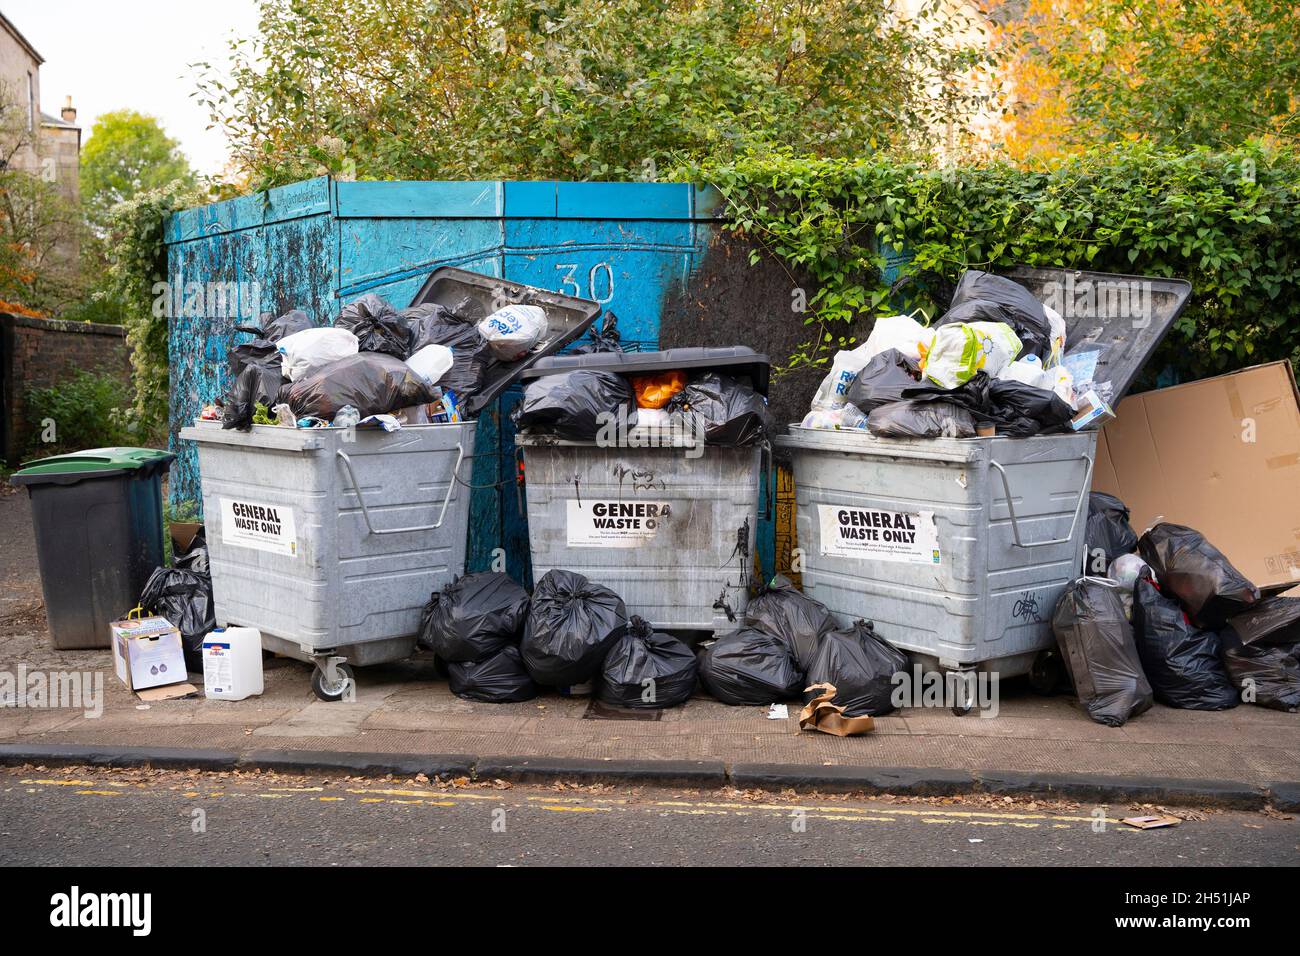 Glasgow, Scotland, UK. 5th November 2021. Rubbish piled beside refuse bins on street in Finnieston Glasgow. Refuse collectors in the city are currently on strike over pay and conditions.   Iain Masterton/Alamy Live News. Stock Photo